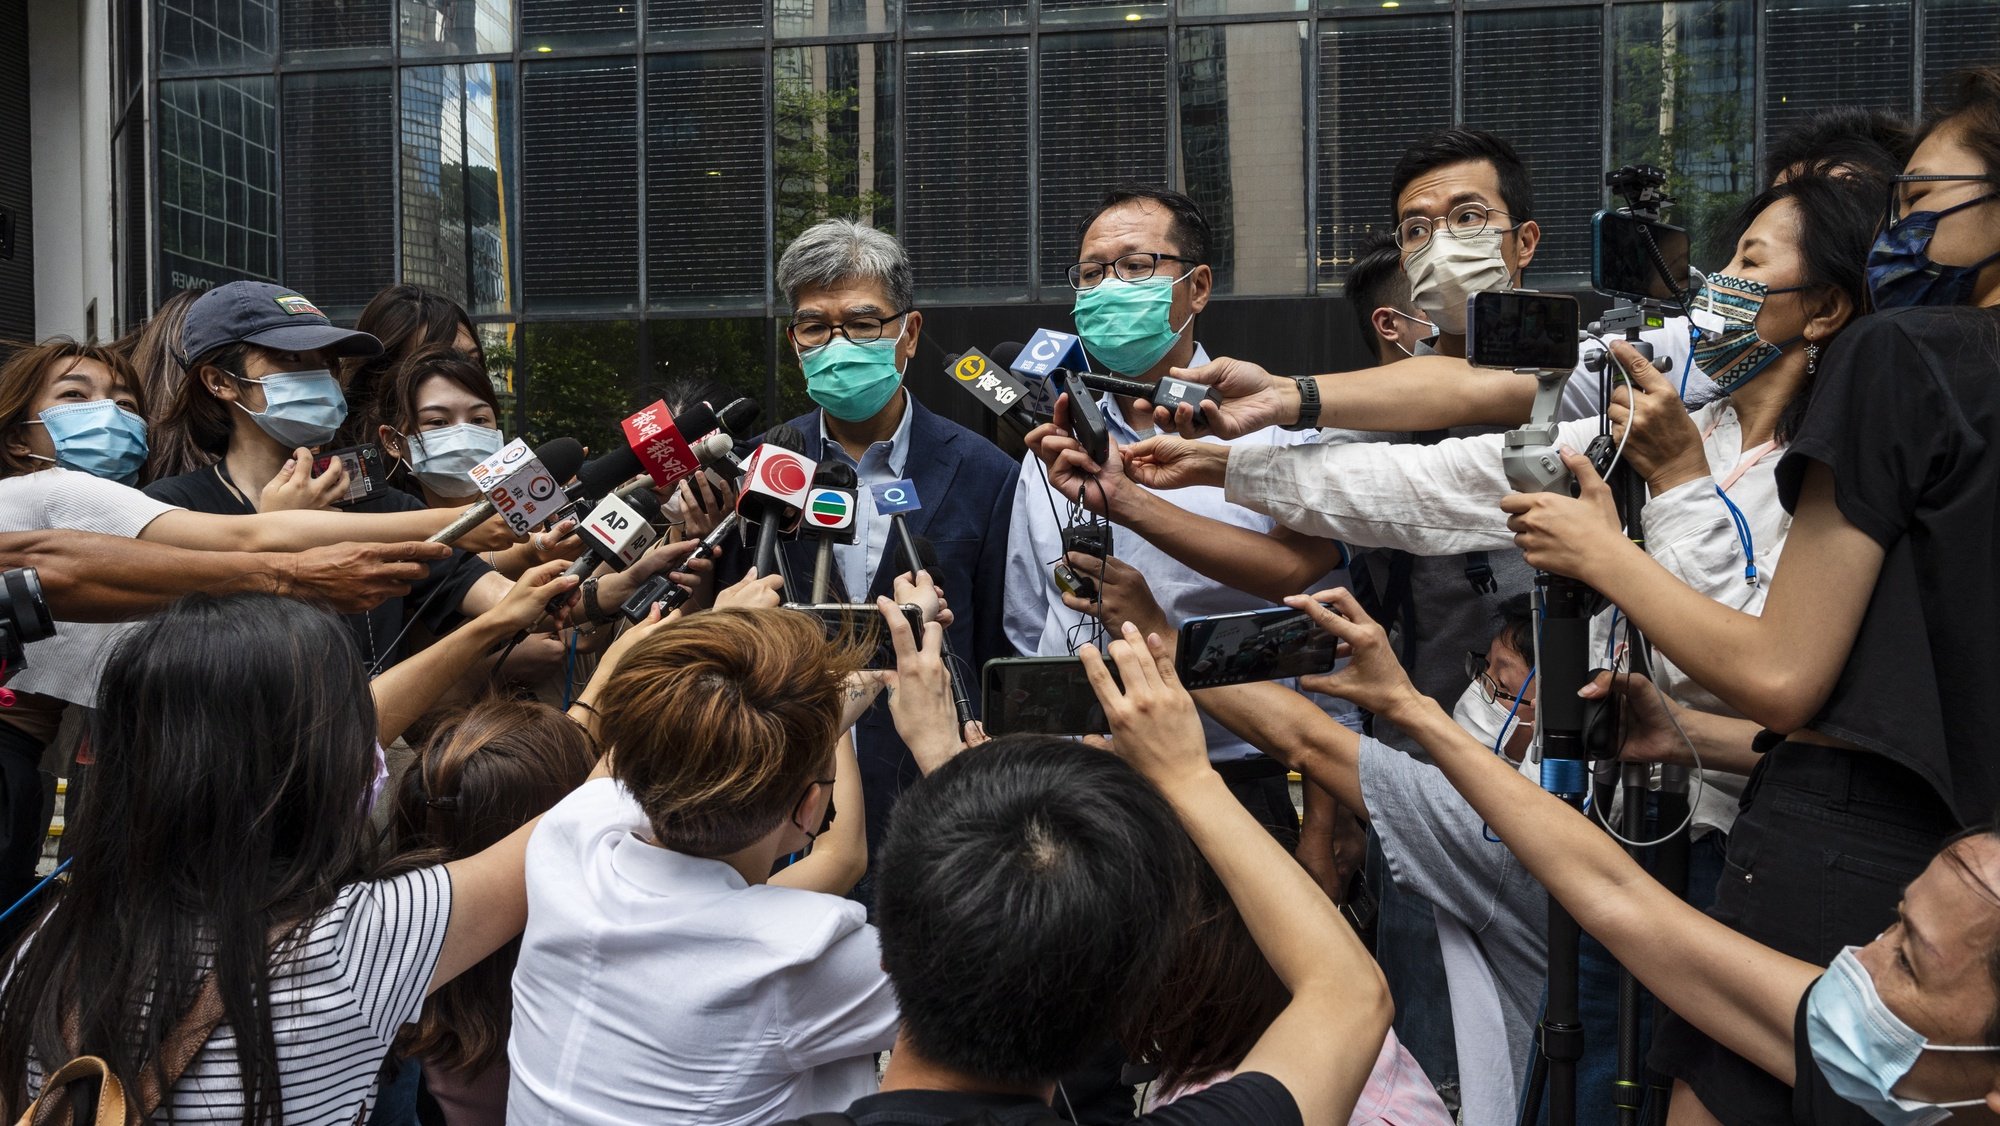 epa09232873 Pro-democracy activists Sin Chung-kai (L) and Richard Tsoi (R) speak to the media outside the West Kowloon Law Courts building as their jail terms were suspended in Hong Kong, China, 28 May 2021. Lai, Leung Kwok-hung, better known &#039;Long Hair&#039;, and other prominent activists are handed a prison terms ranging from 14 months to 18 months, for organising unauthorized National Day assembly.  EPA/MIGUEL CANDELA